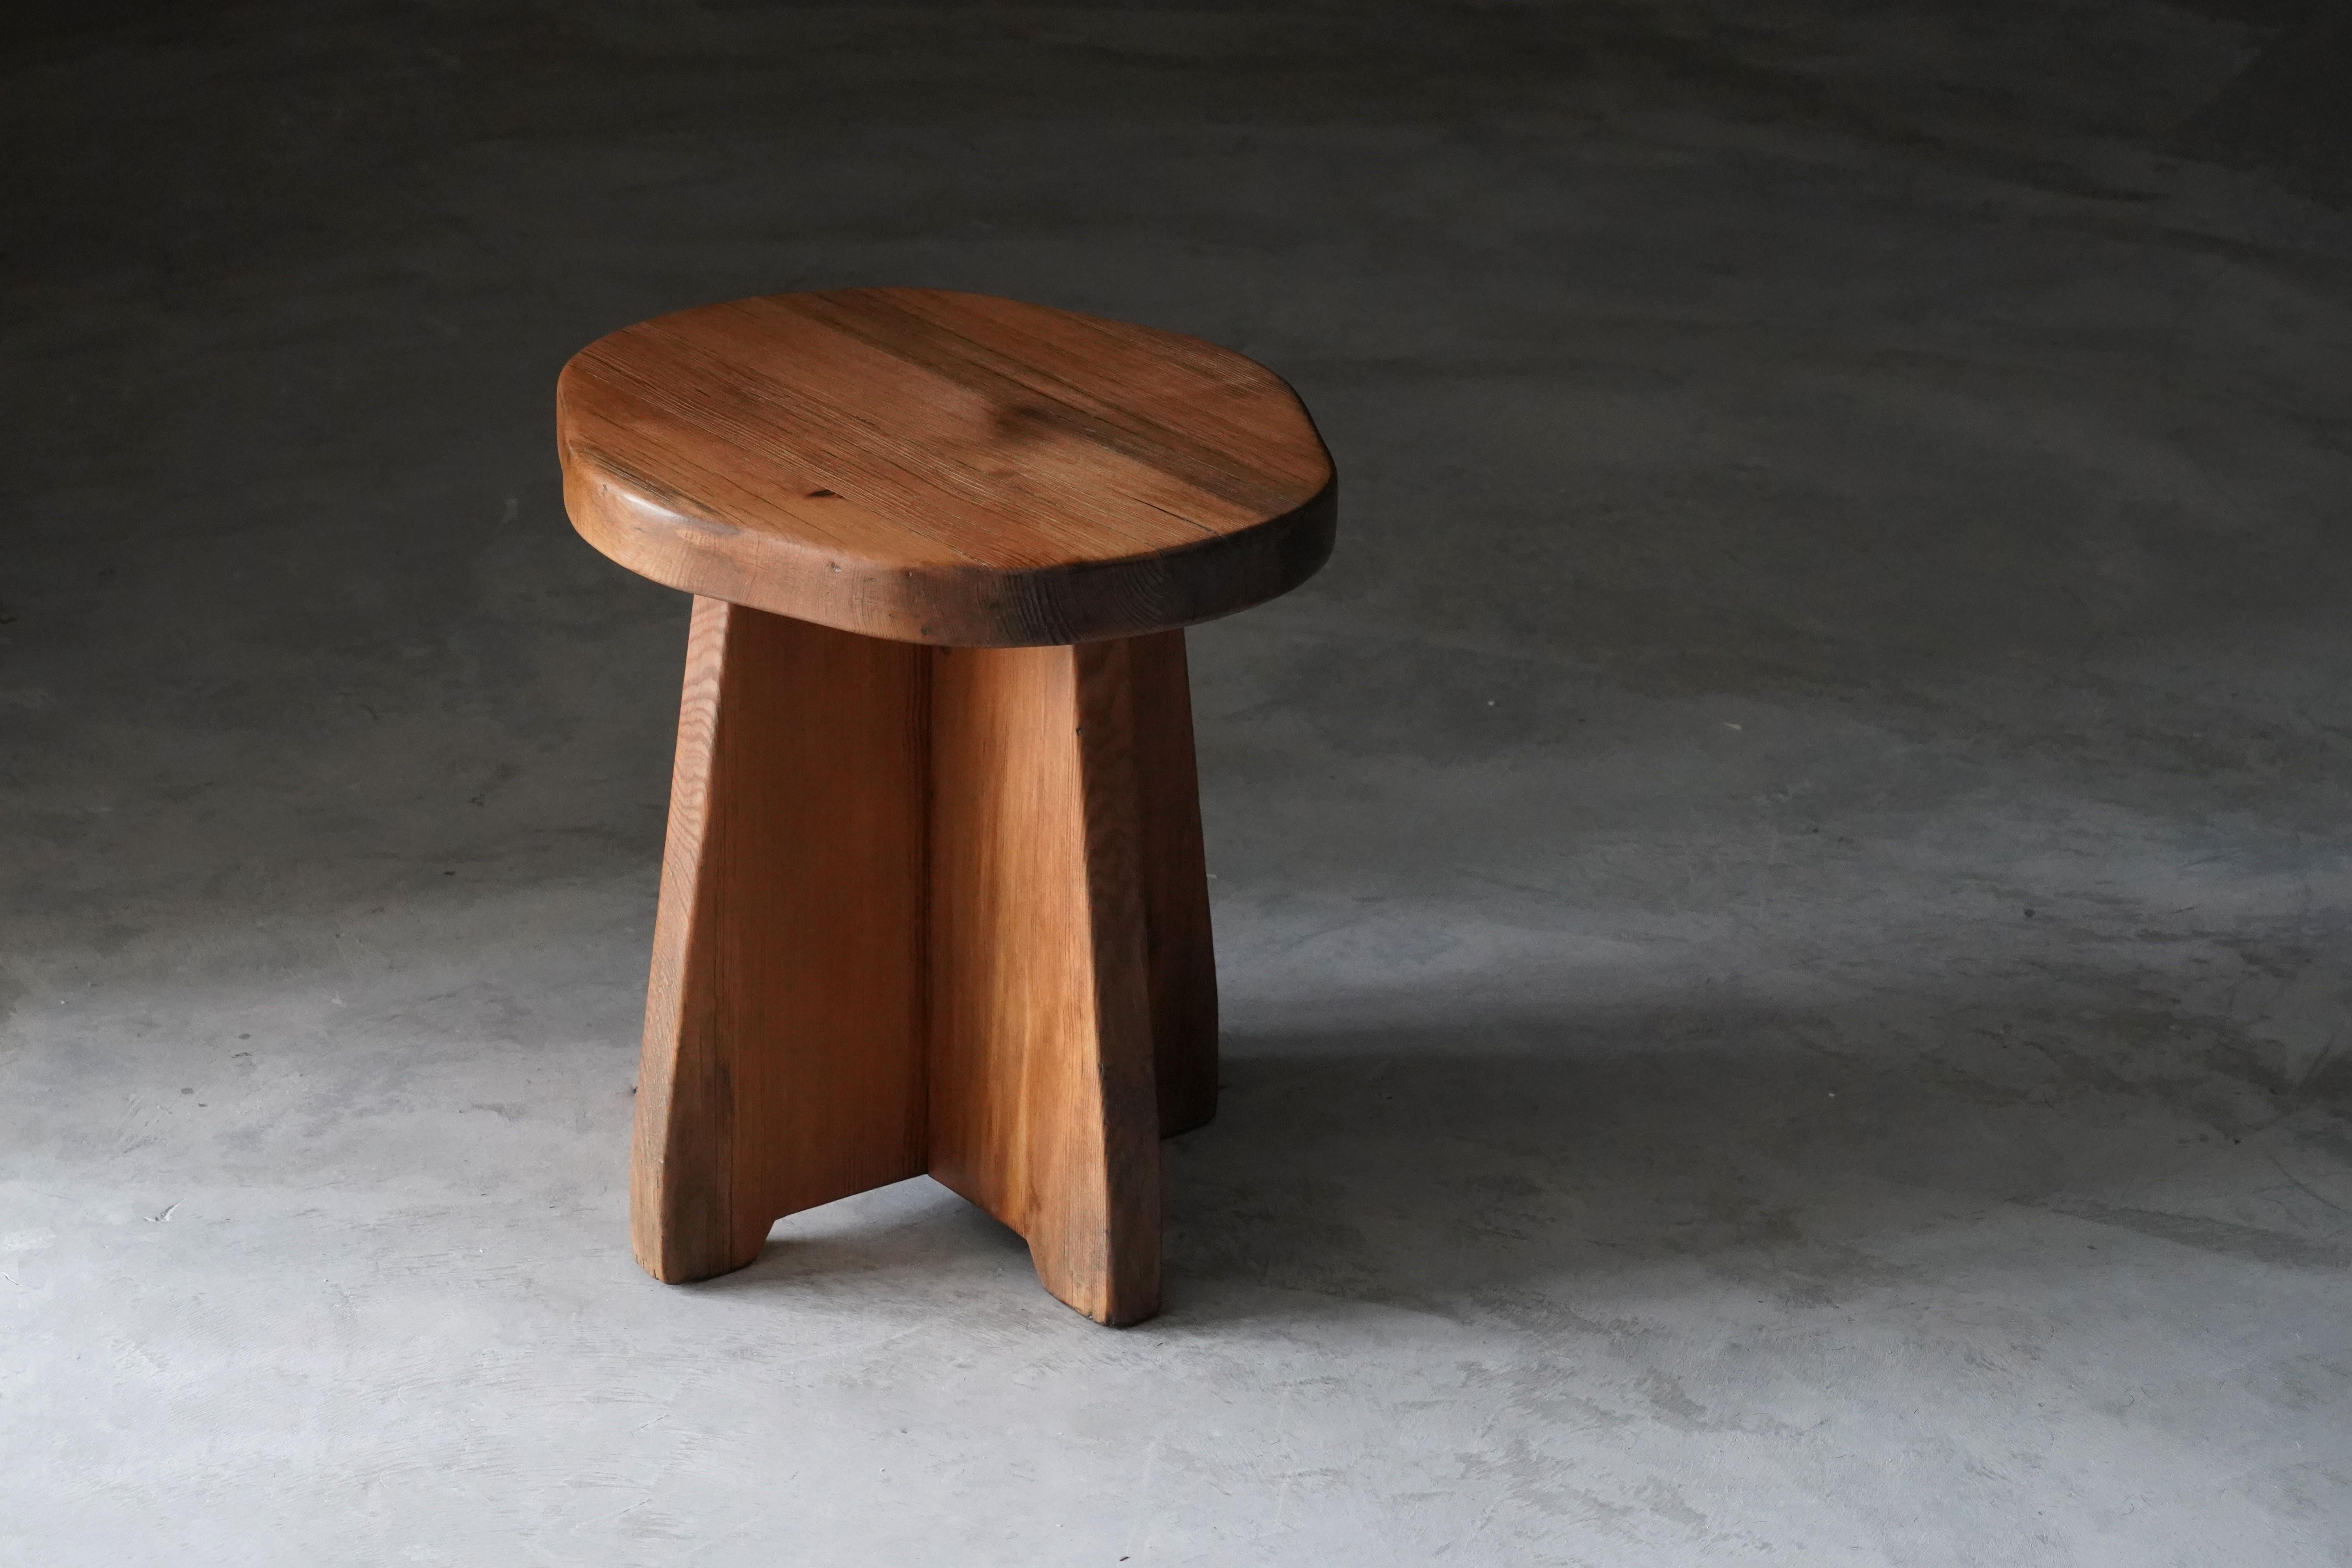 A rare stool or side table designed by David Rosén, possibly model 